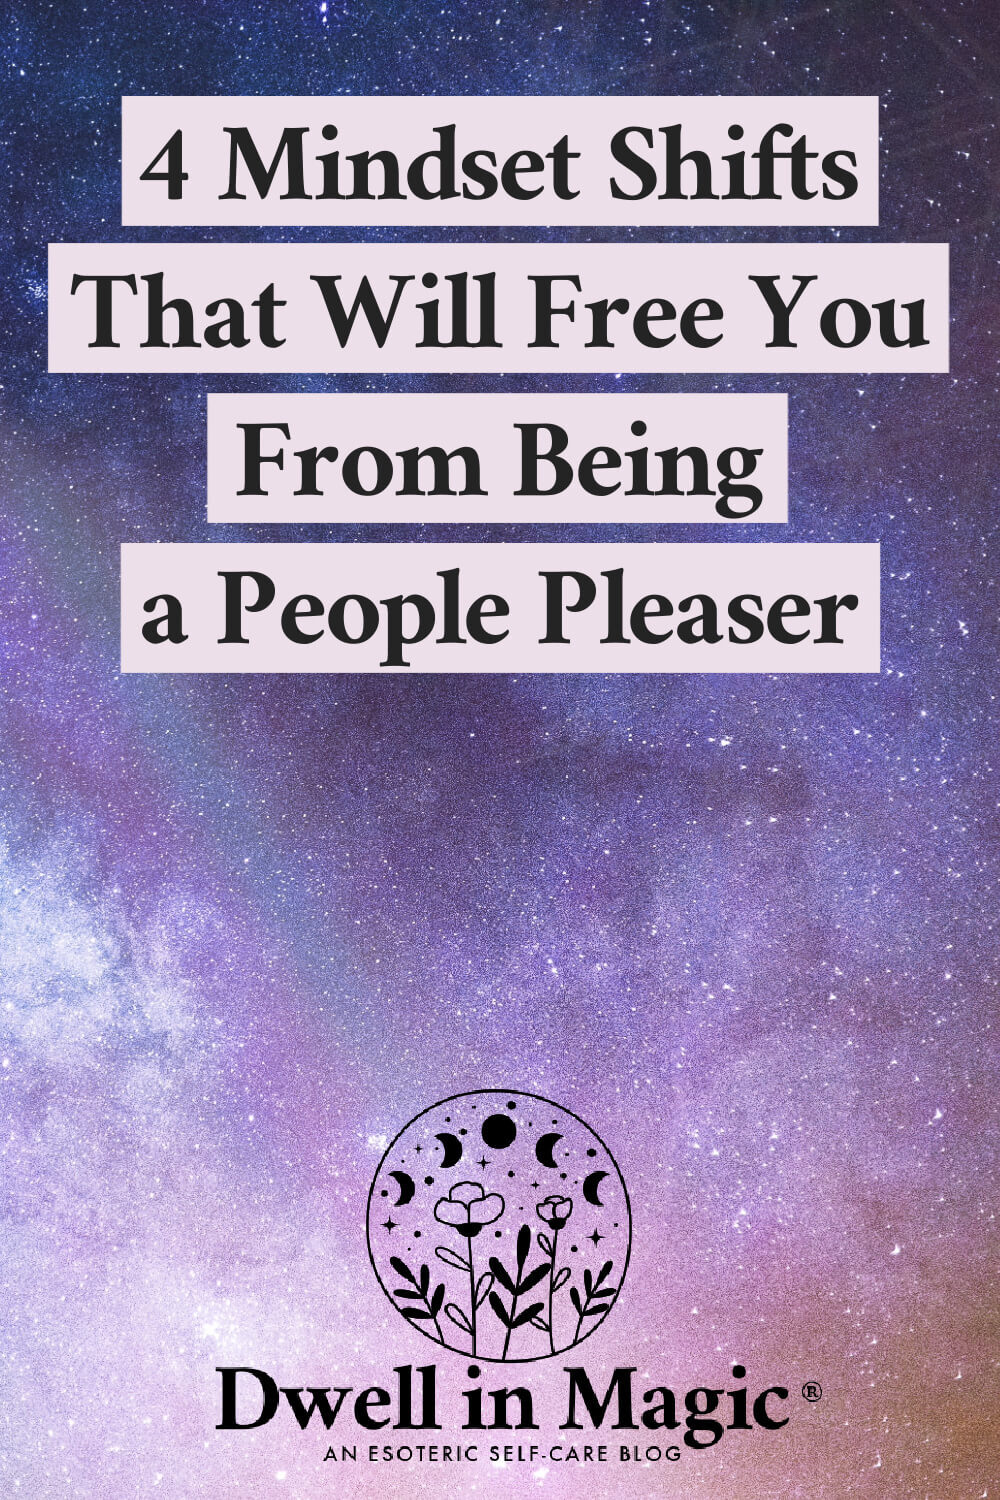 Mindset shifts that will free you from being a people pleaser